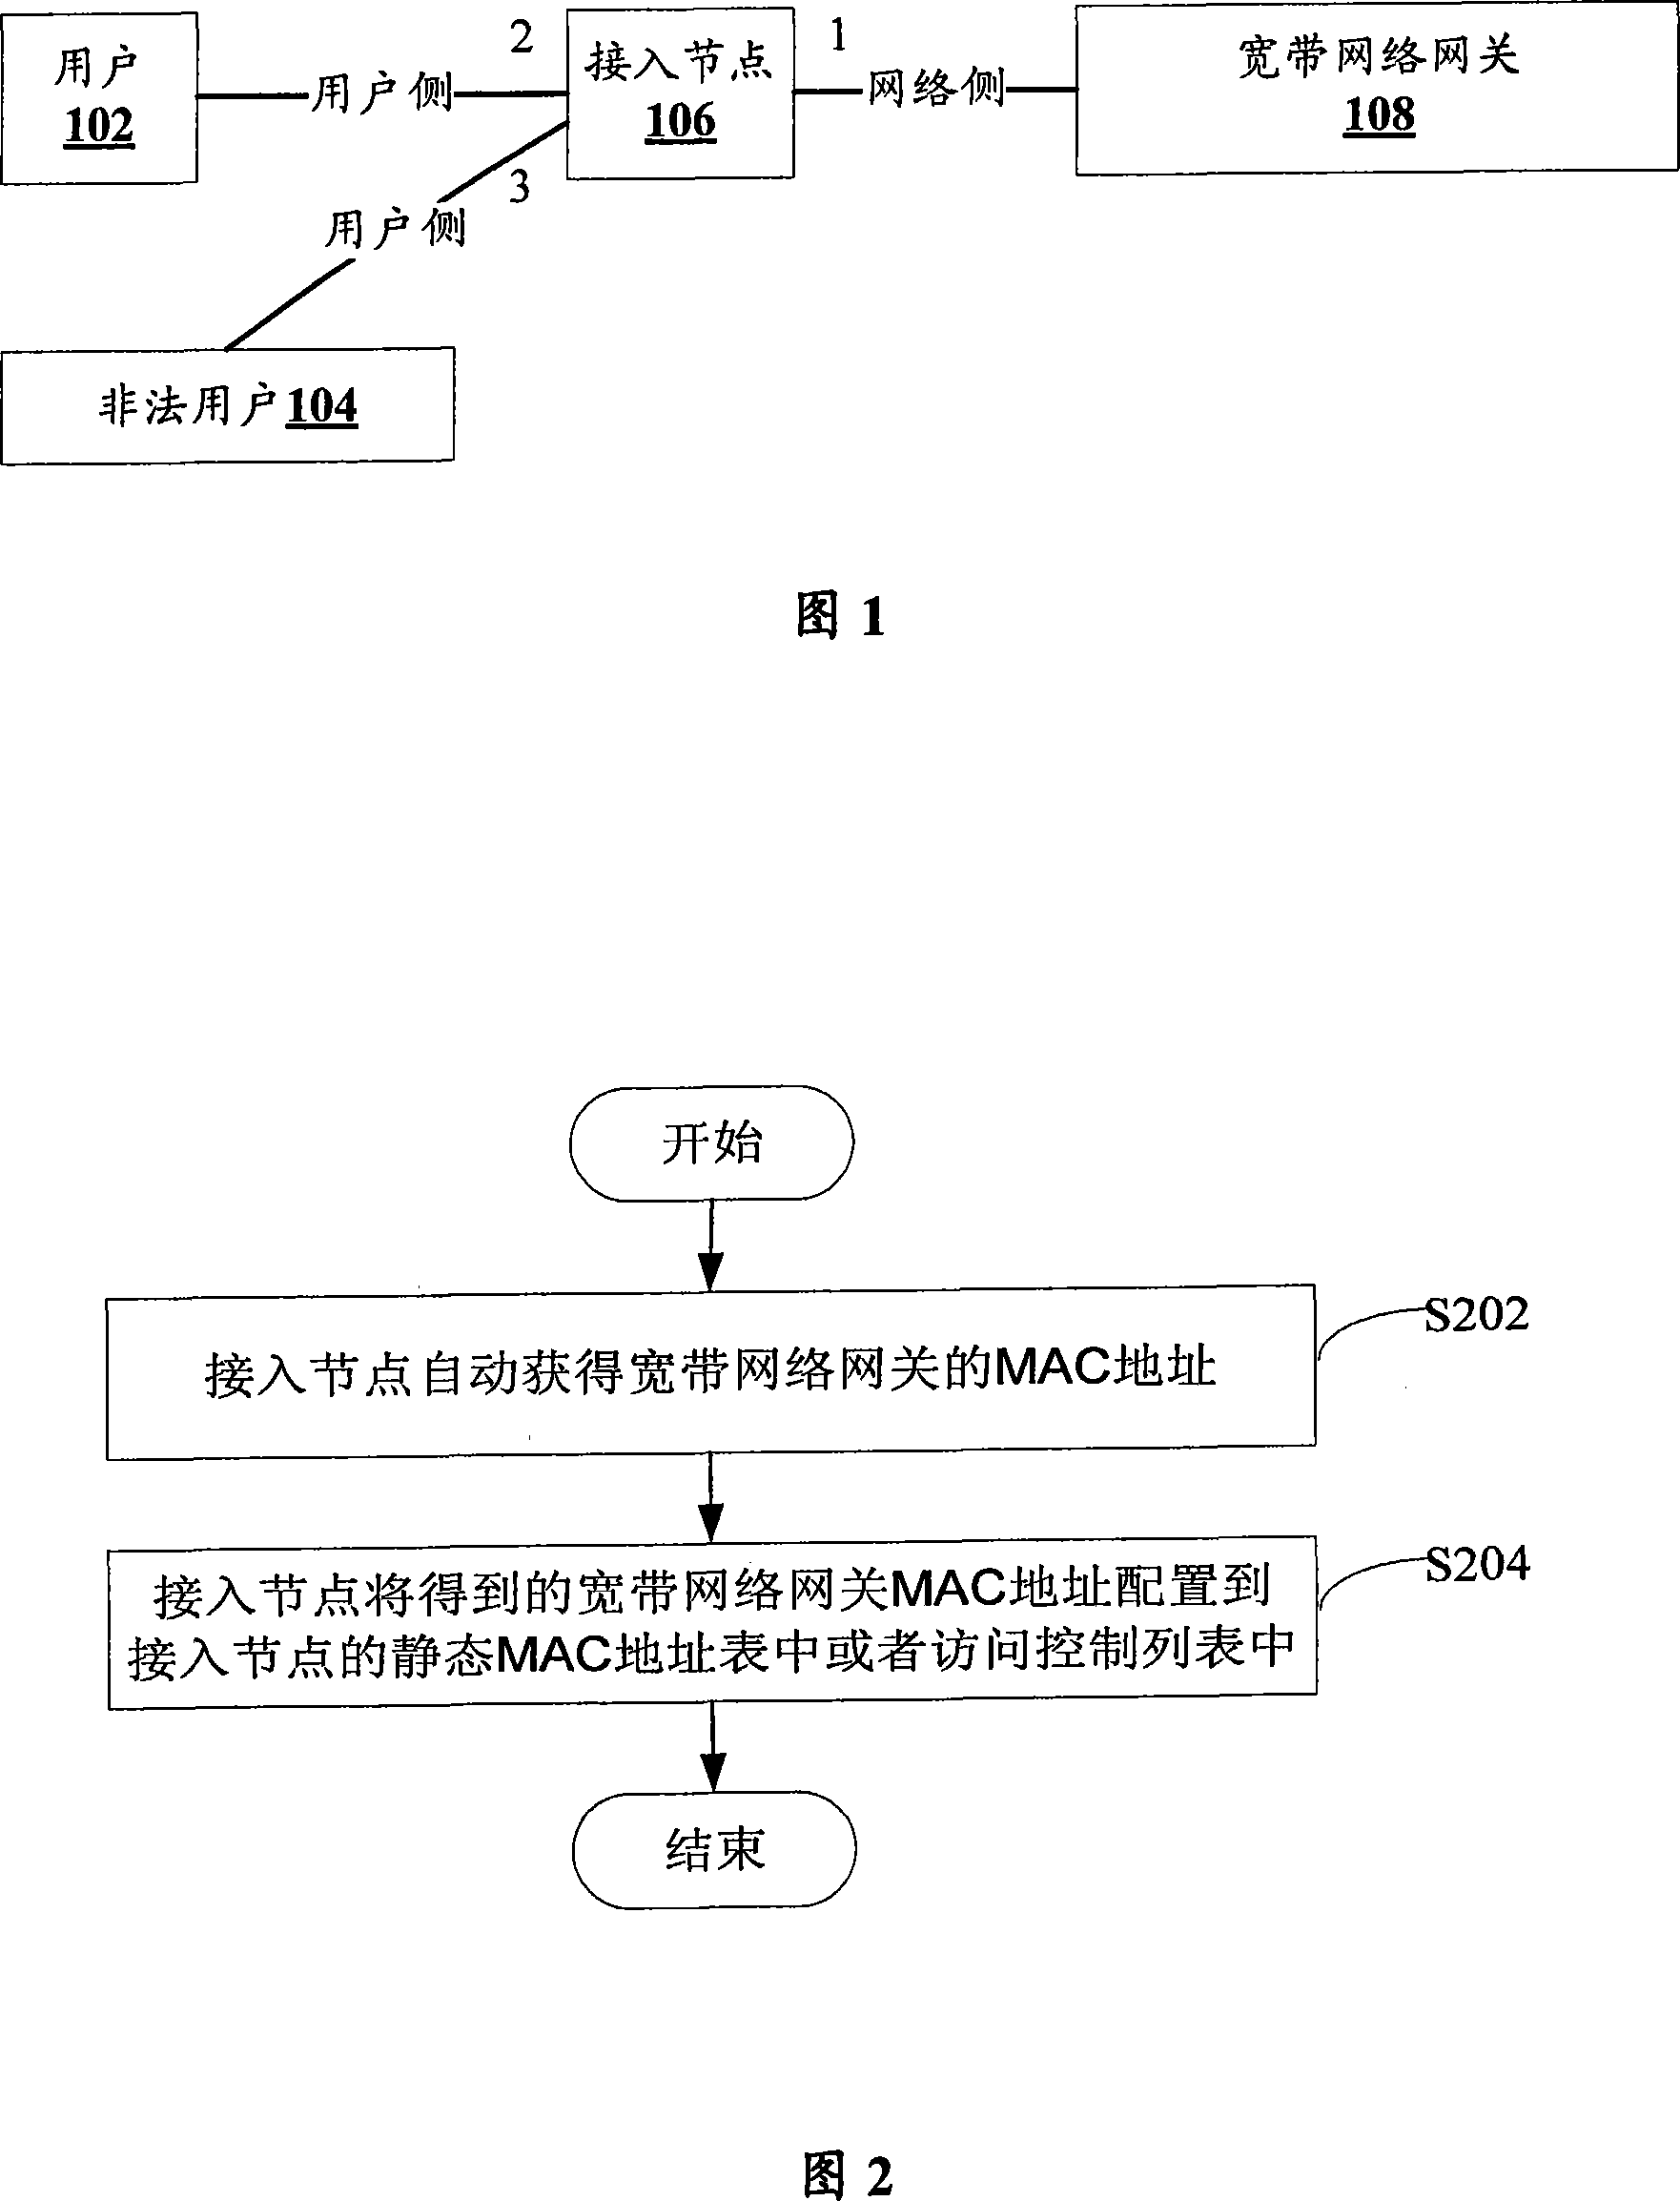 Method and apparatus for preventing network intermedium from accessing into control address